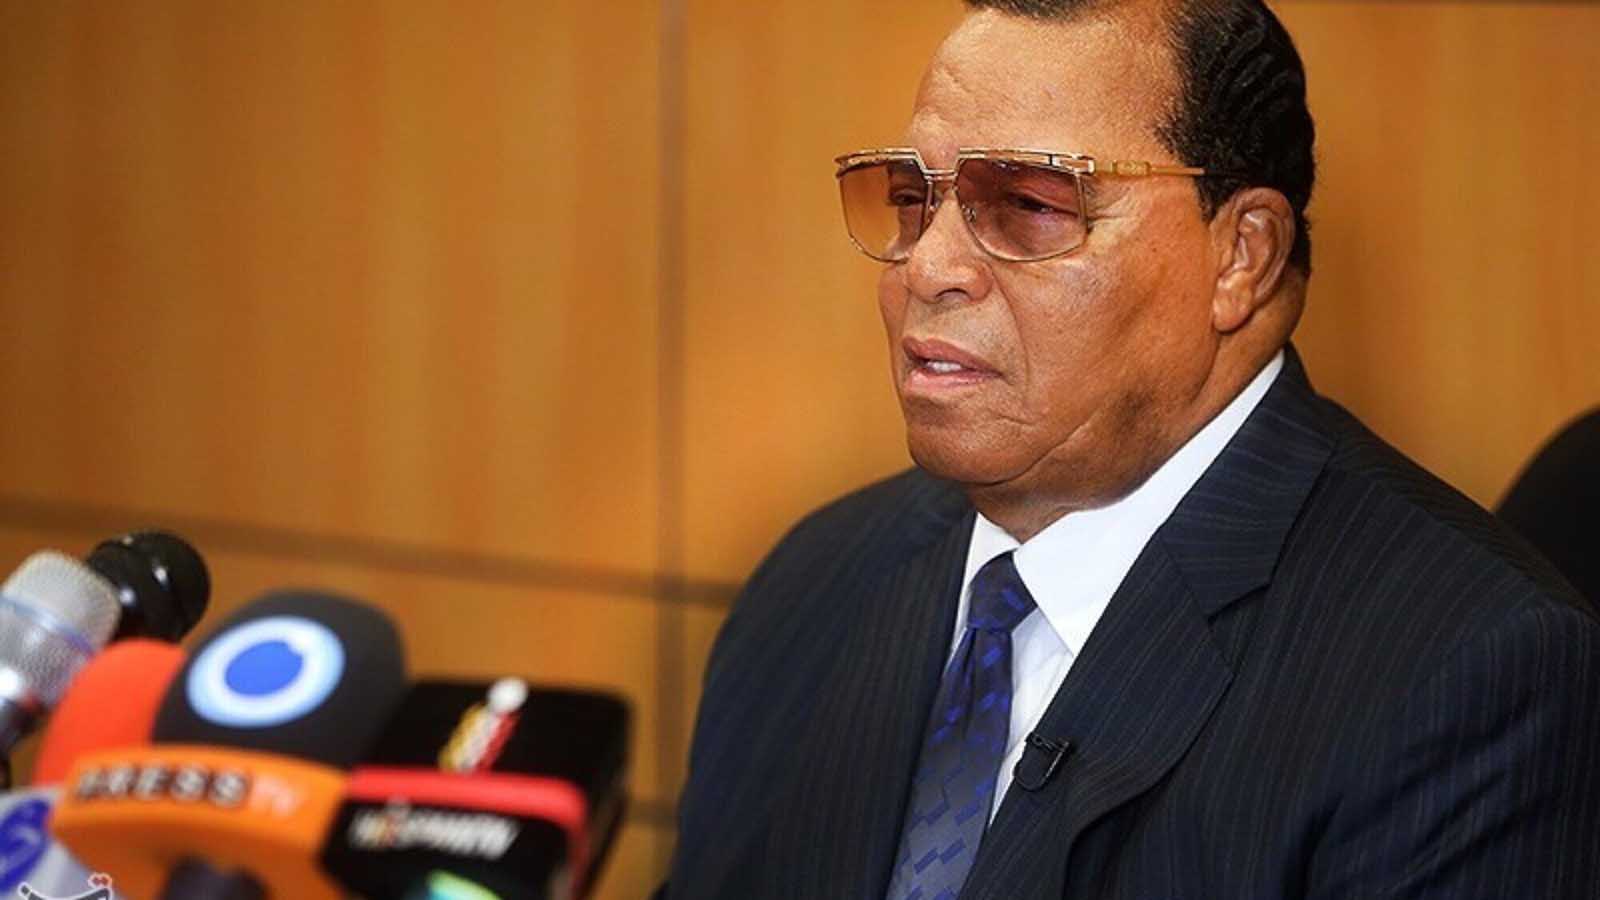 If you have never heard of Farrakhan nor his views, it may seem confusing that a man leading a black movement is accused of antisemitism. 